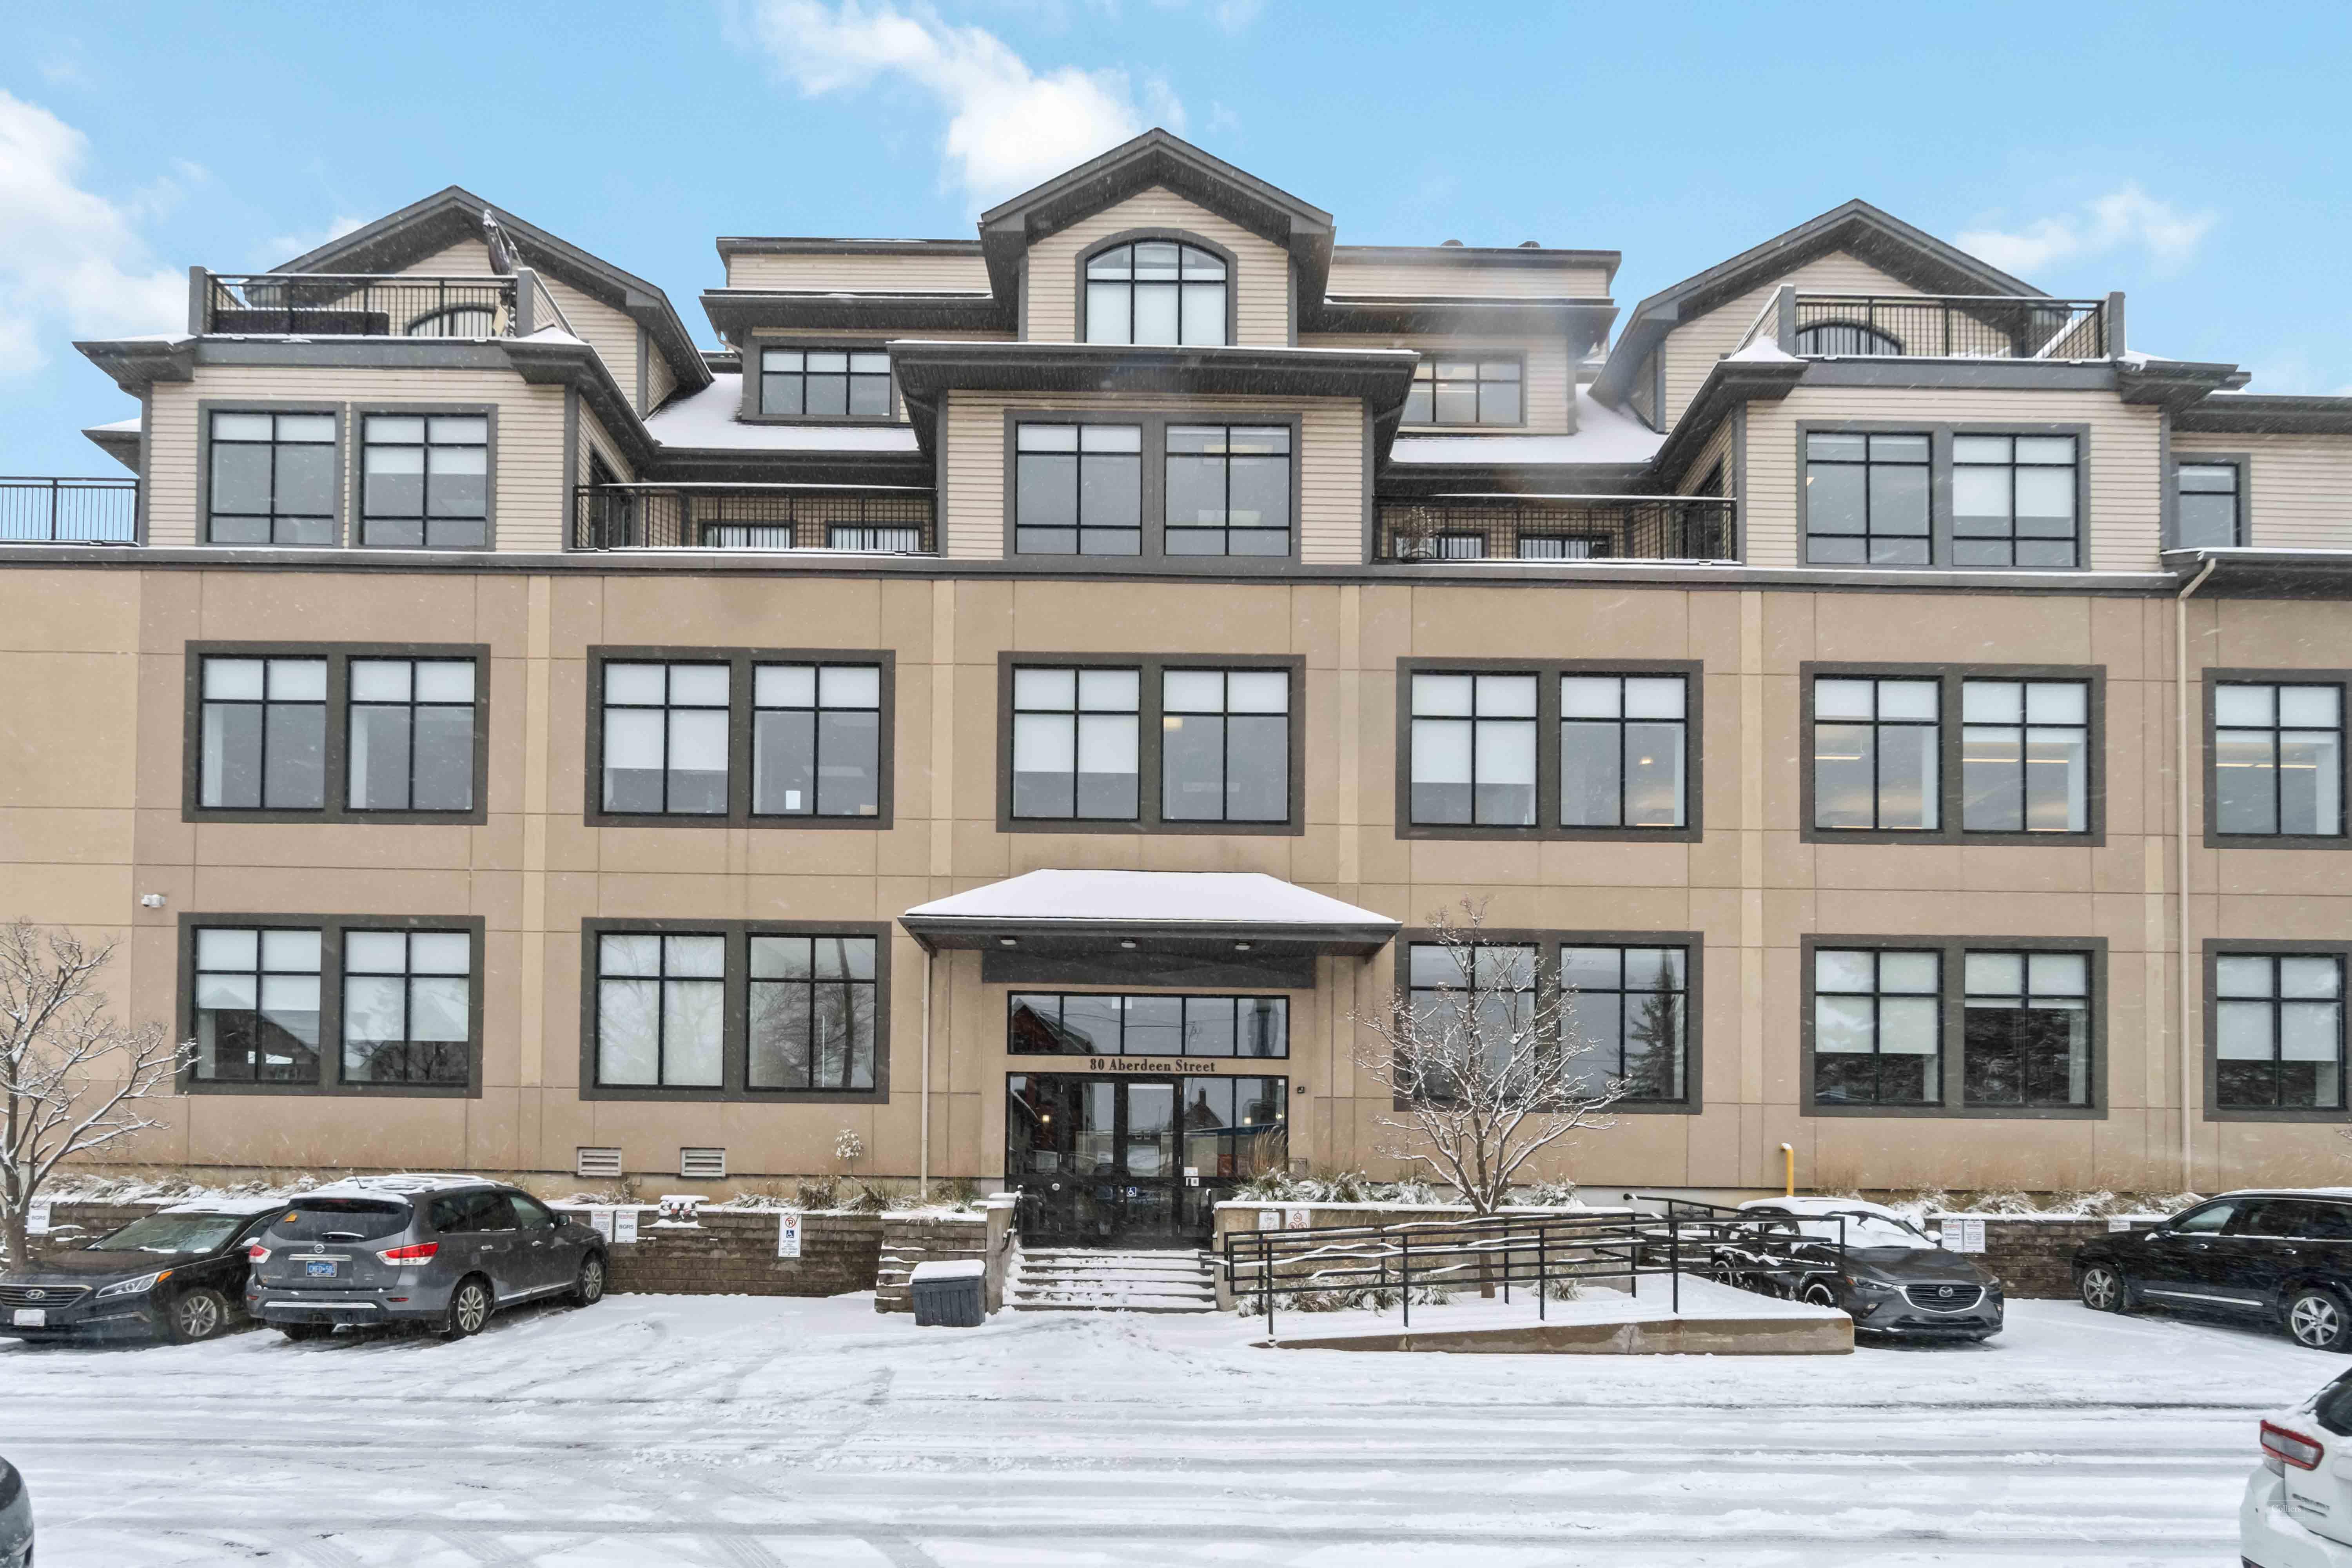 Office For Ottawa, | Lease Canada Suite Ontario, Colliers — 401, | Canada Street, Aberdeen 80